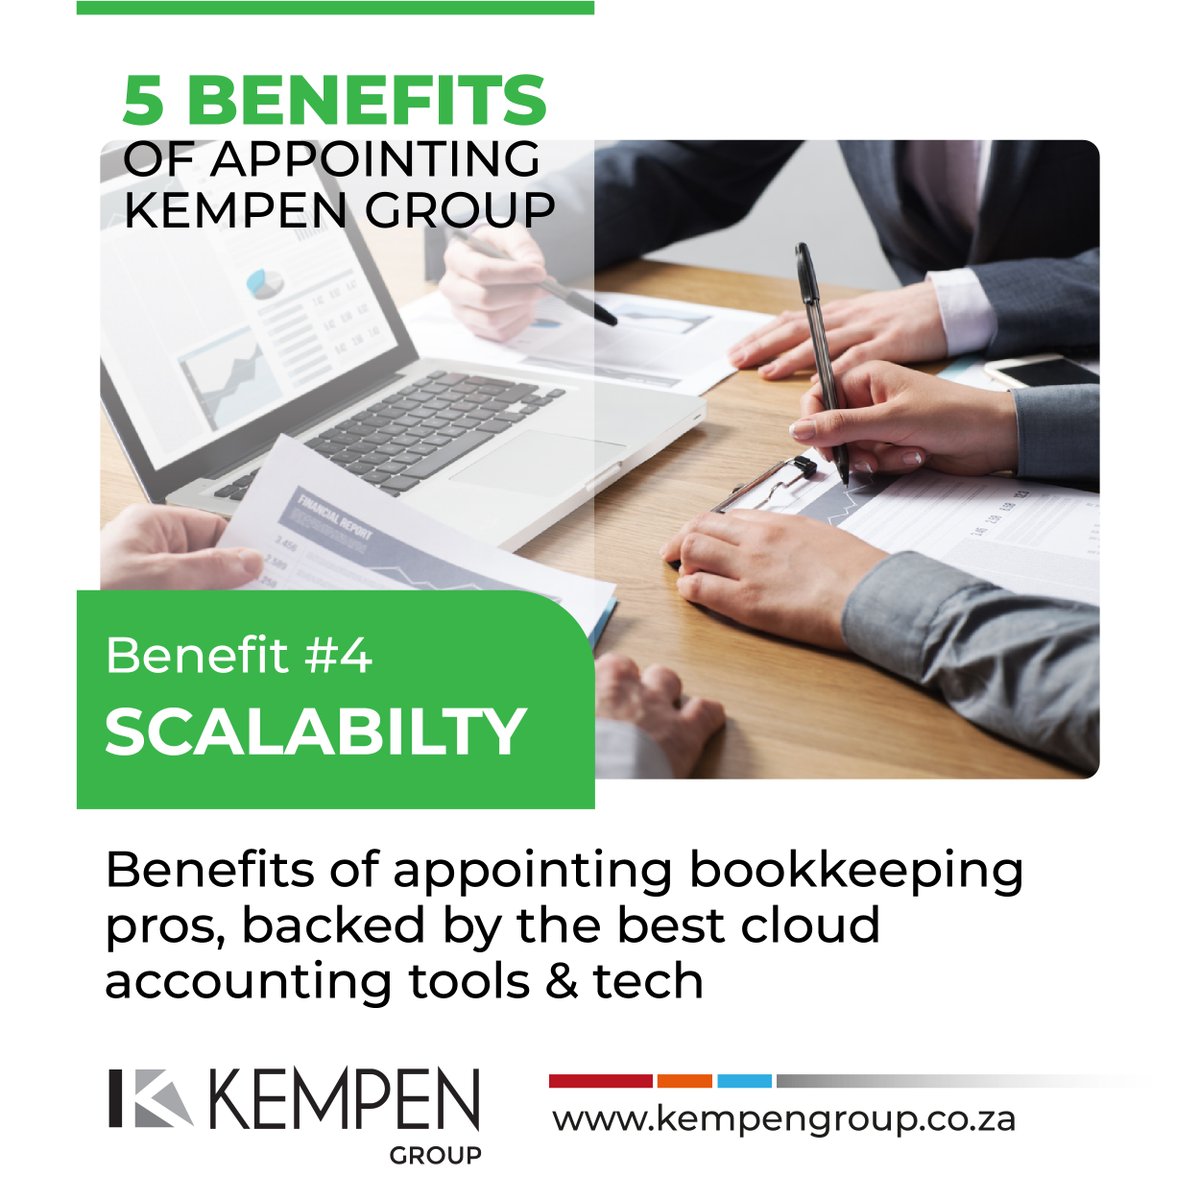 #Cloudaccounting tools are scalable, ensuring they can adapt to the growth of your business. This flexibility enables #KempenGroup to provide the necessary support as your business expands.

Let us know how we can assist:
📱082 940 6700
📧ignus@kempengroup.co.za

#KempenOnline